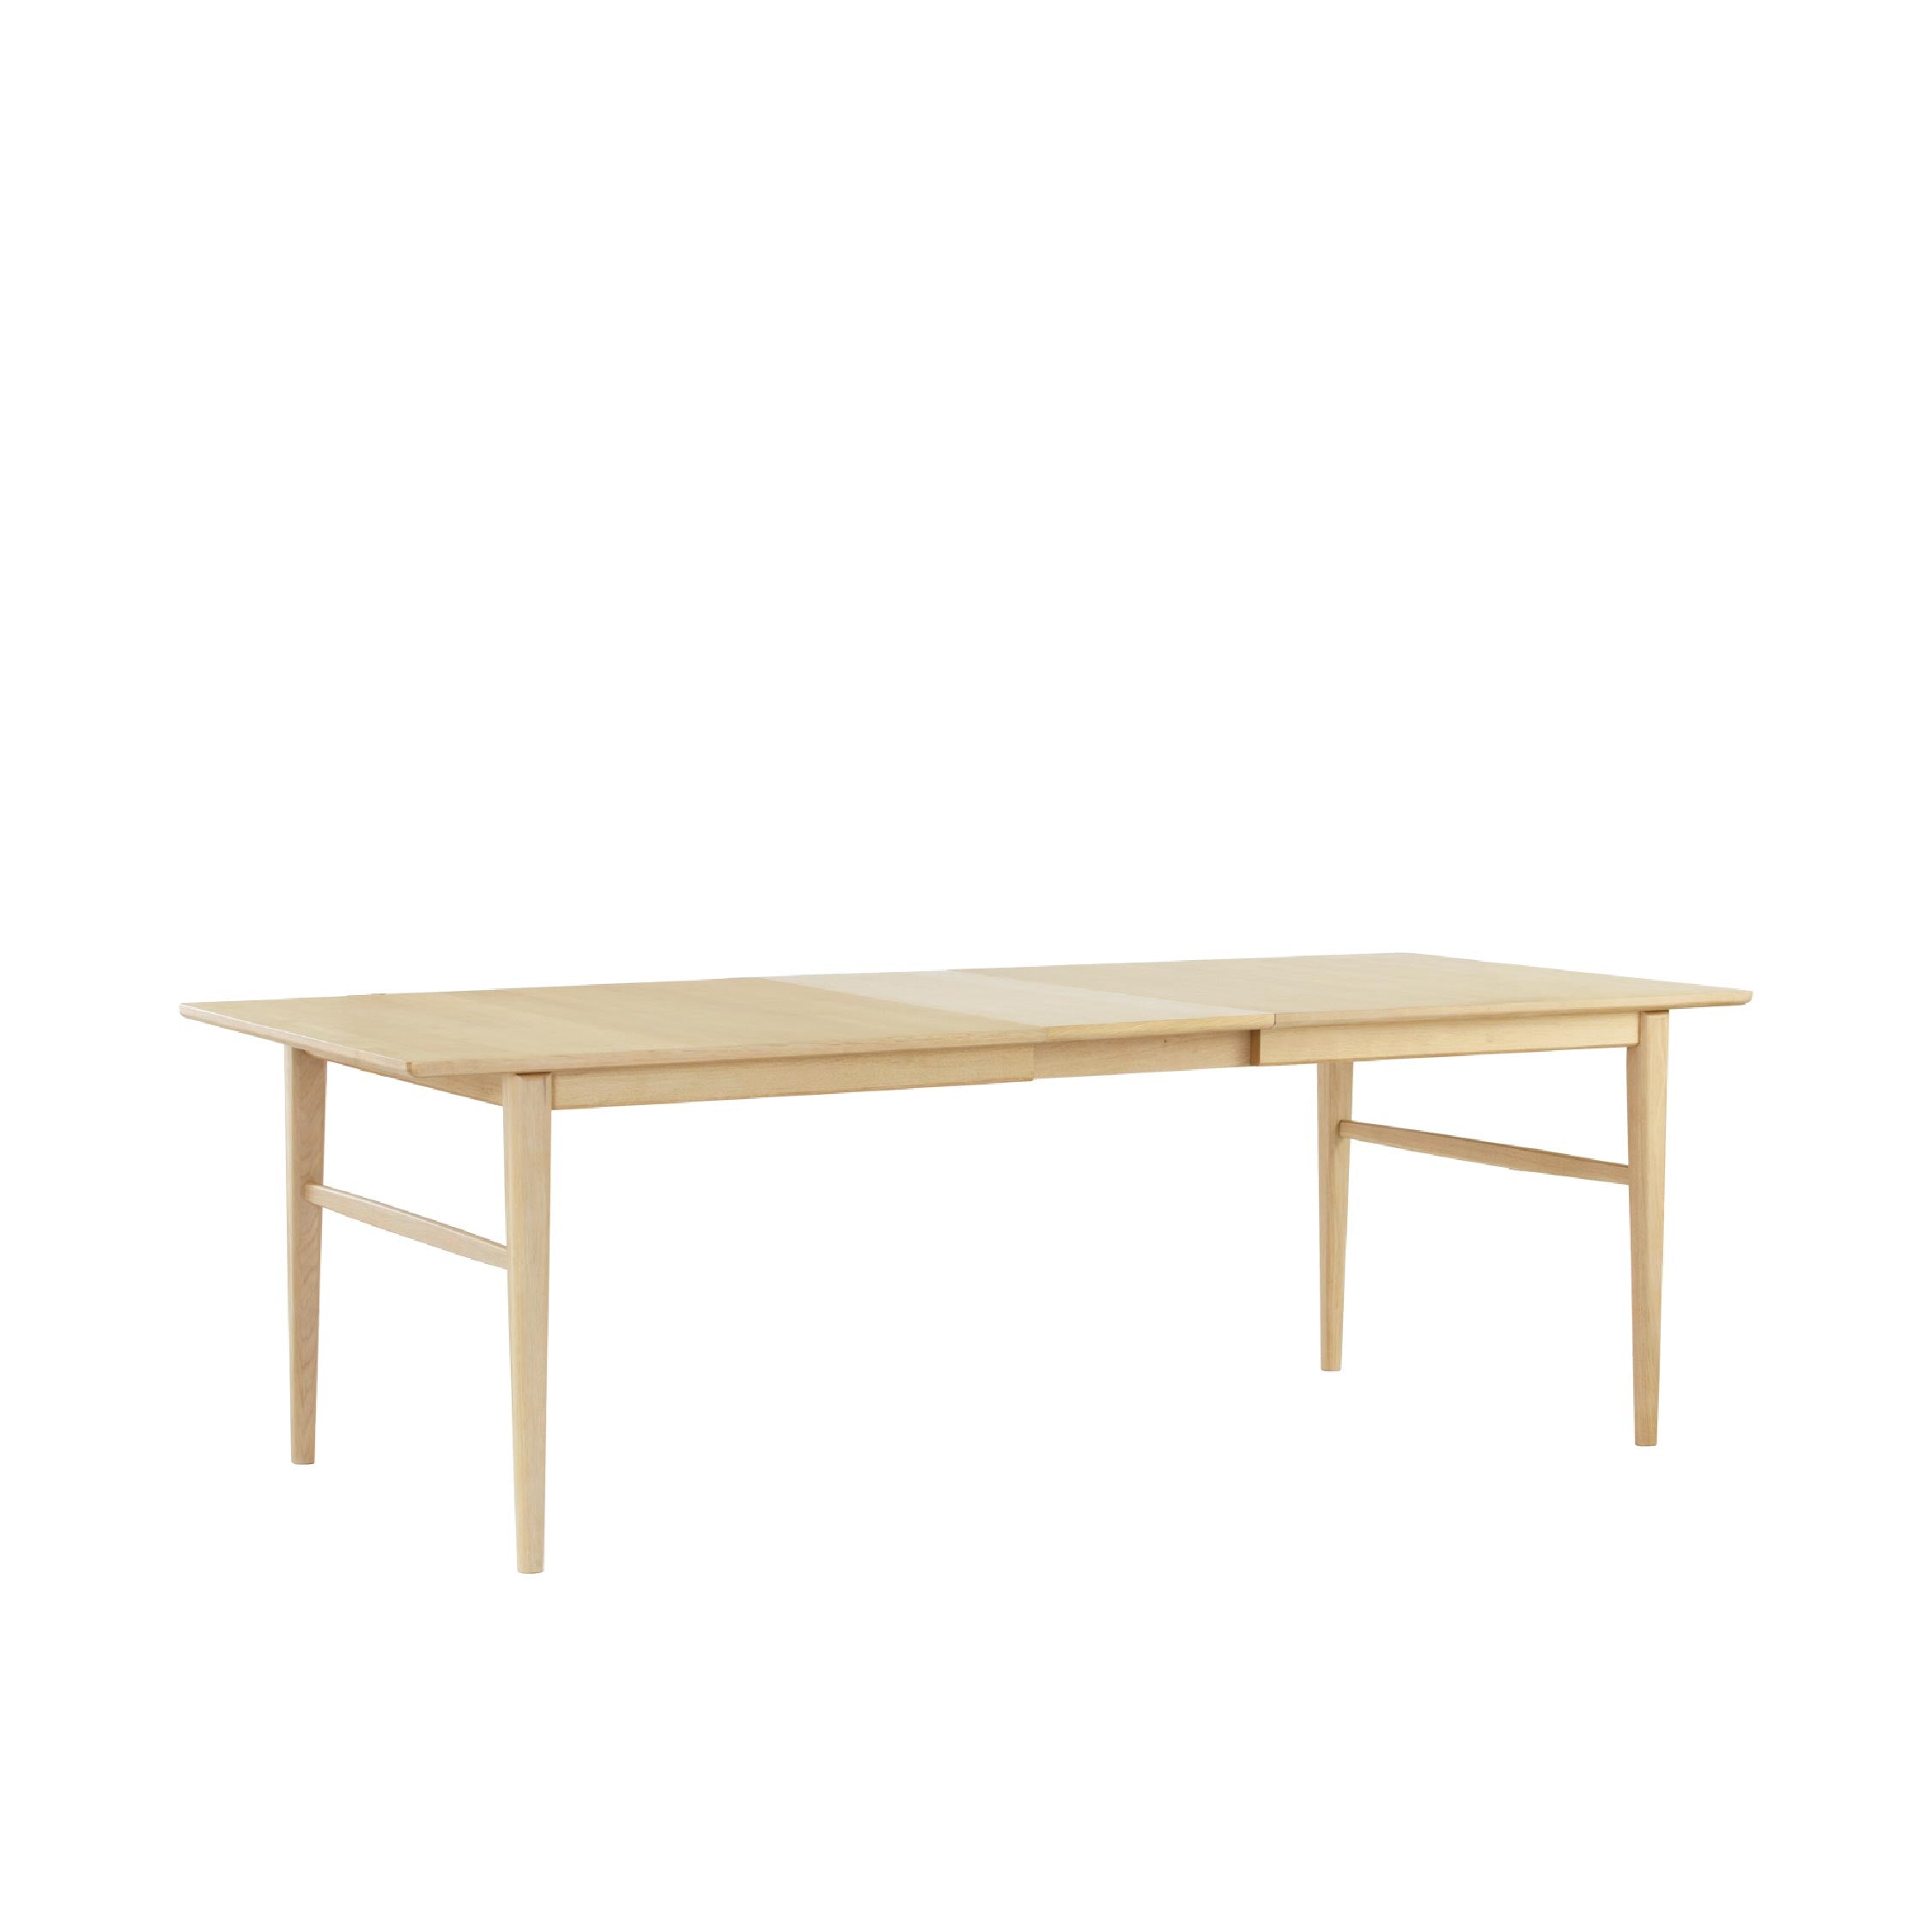 SOLID Extendable Dining Table 2.95m